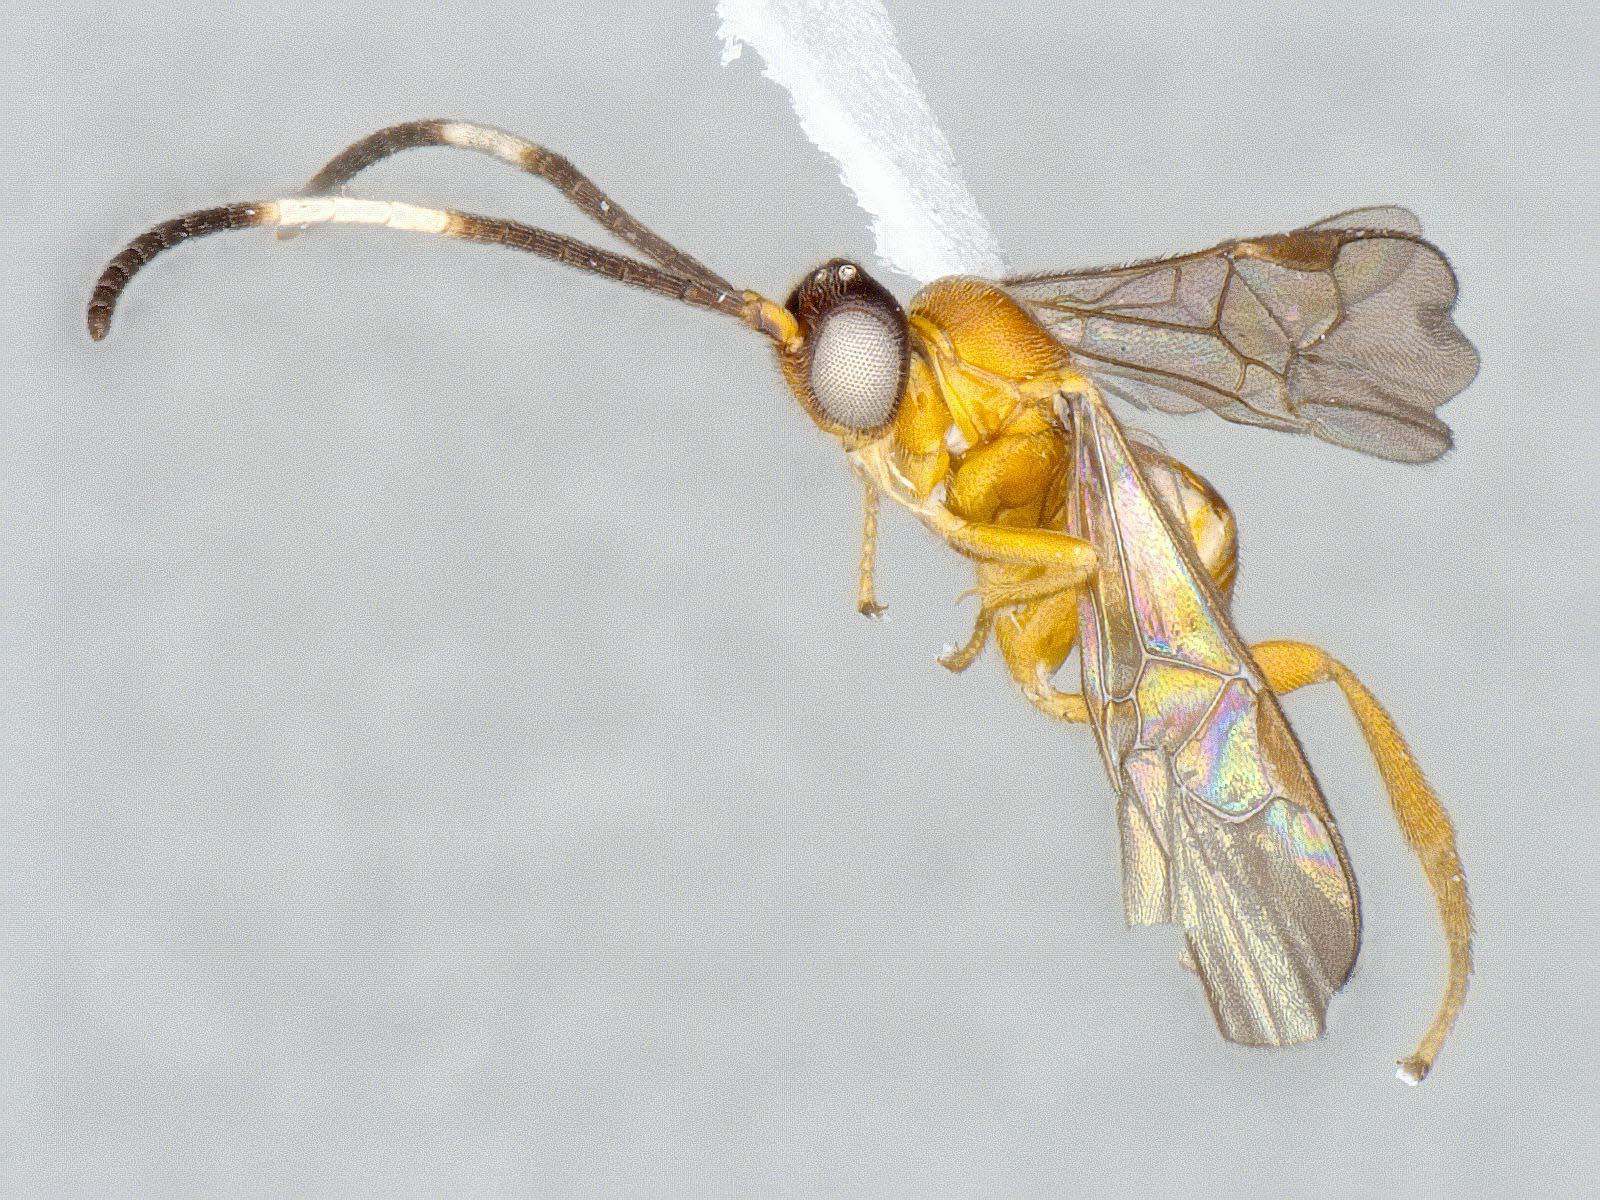 World, meet Pseudapanteles luisguillermosolisi, a new wasp species named after Costa Rica’s president